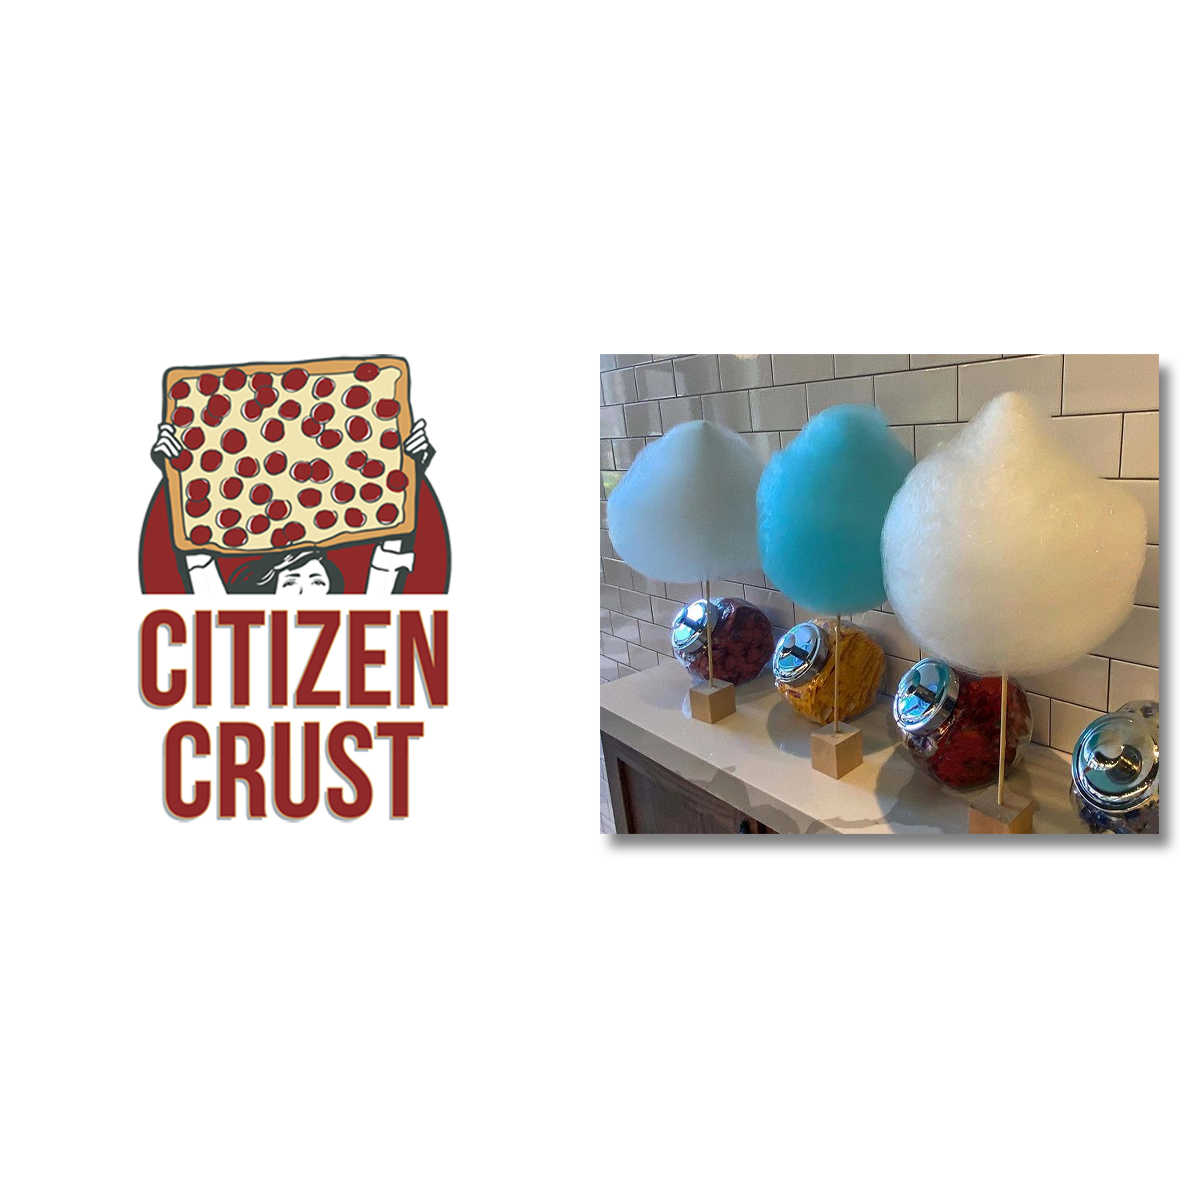 Free Cotton Candy with any entree purchase at Citizen Crust